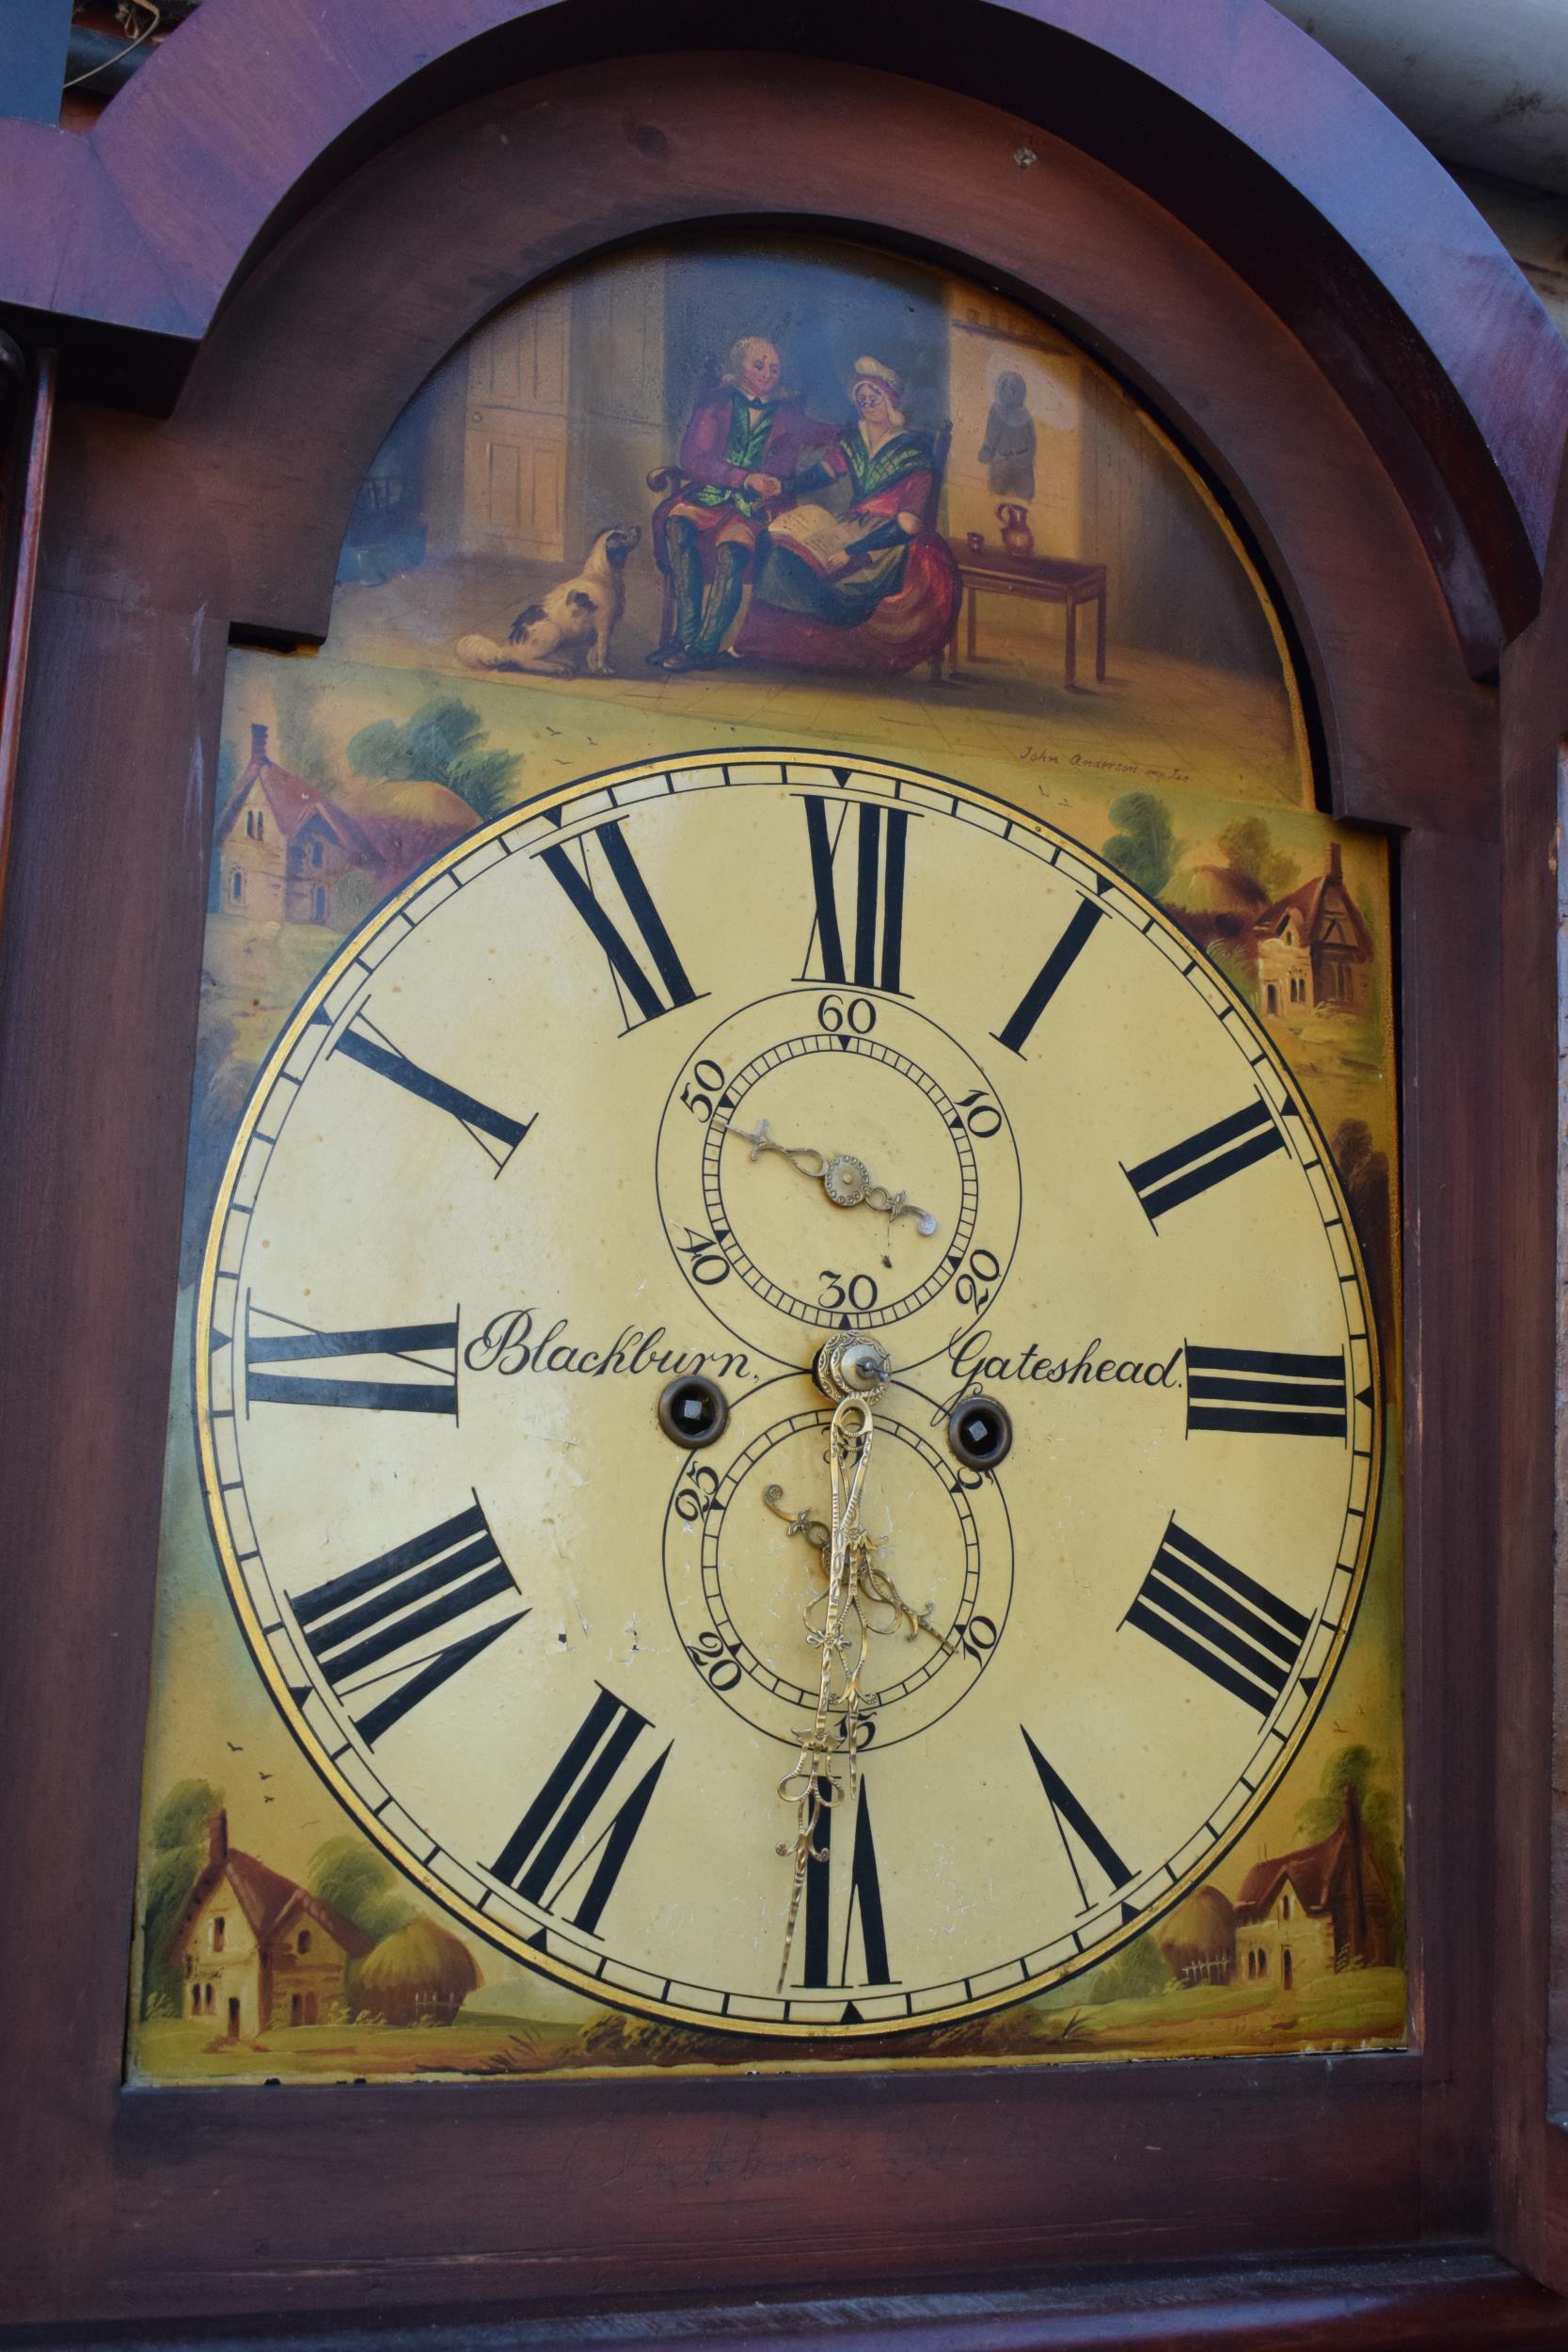 19th century mahogany cased 8 day Grandfather clock Blackburn of Gateshead, complete with - Image 12 of 21